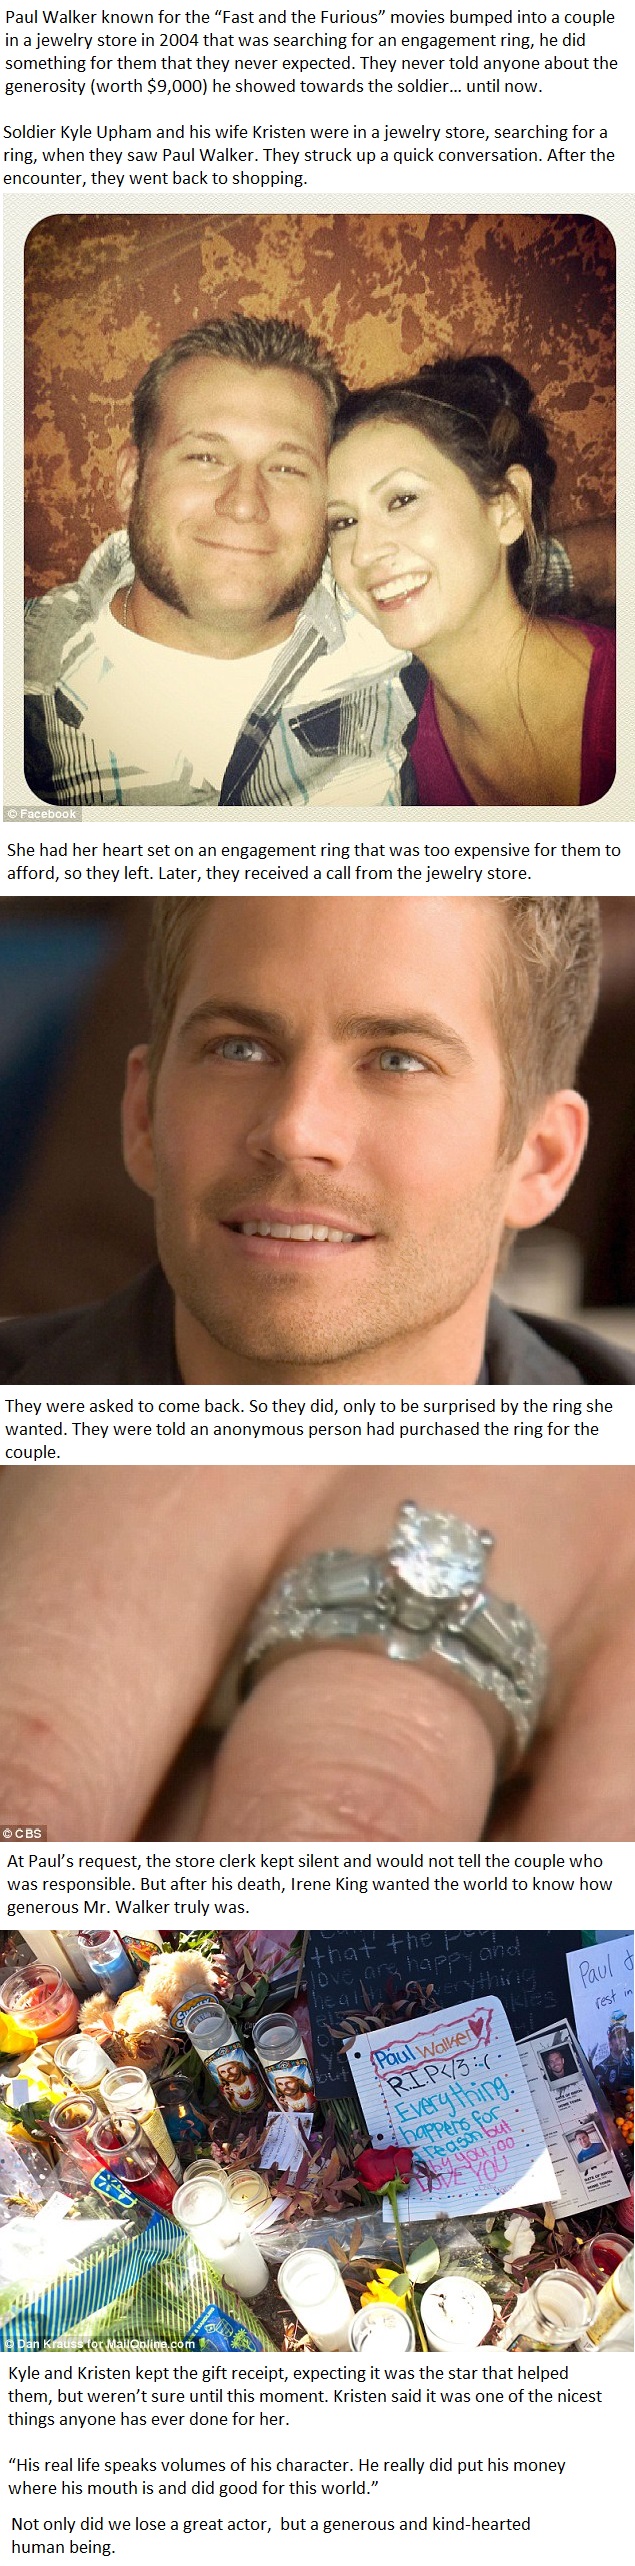 After Reading This I wanted To Cry... See What Amazing Thing Paul Walker Did In Secret...